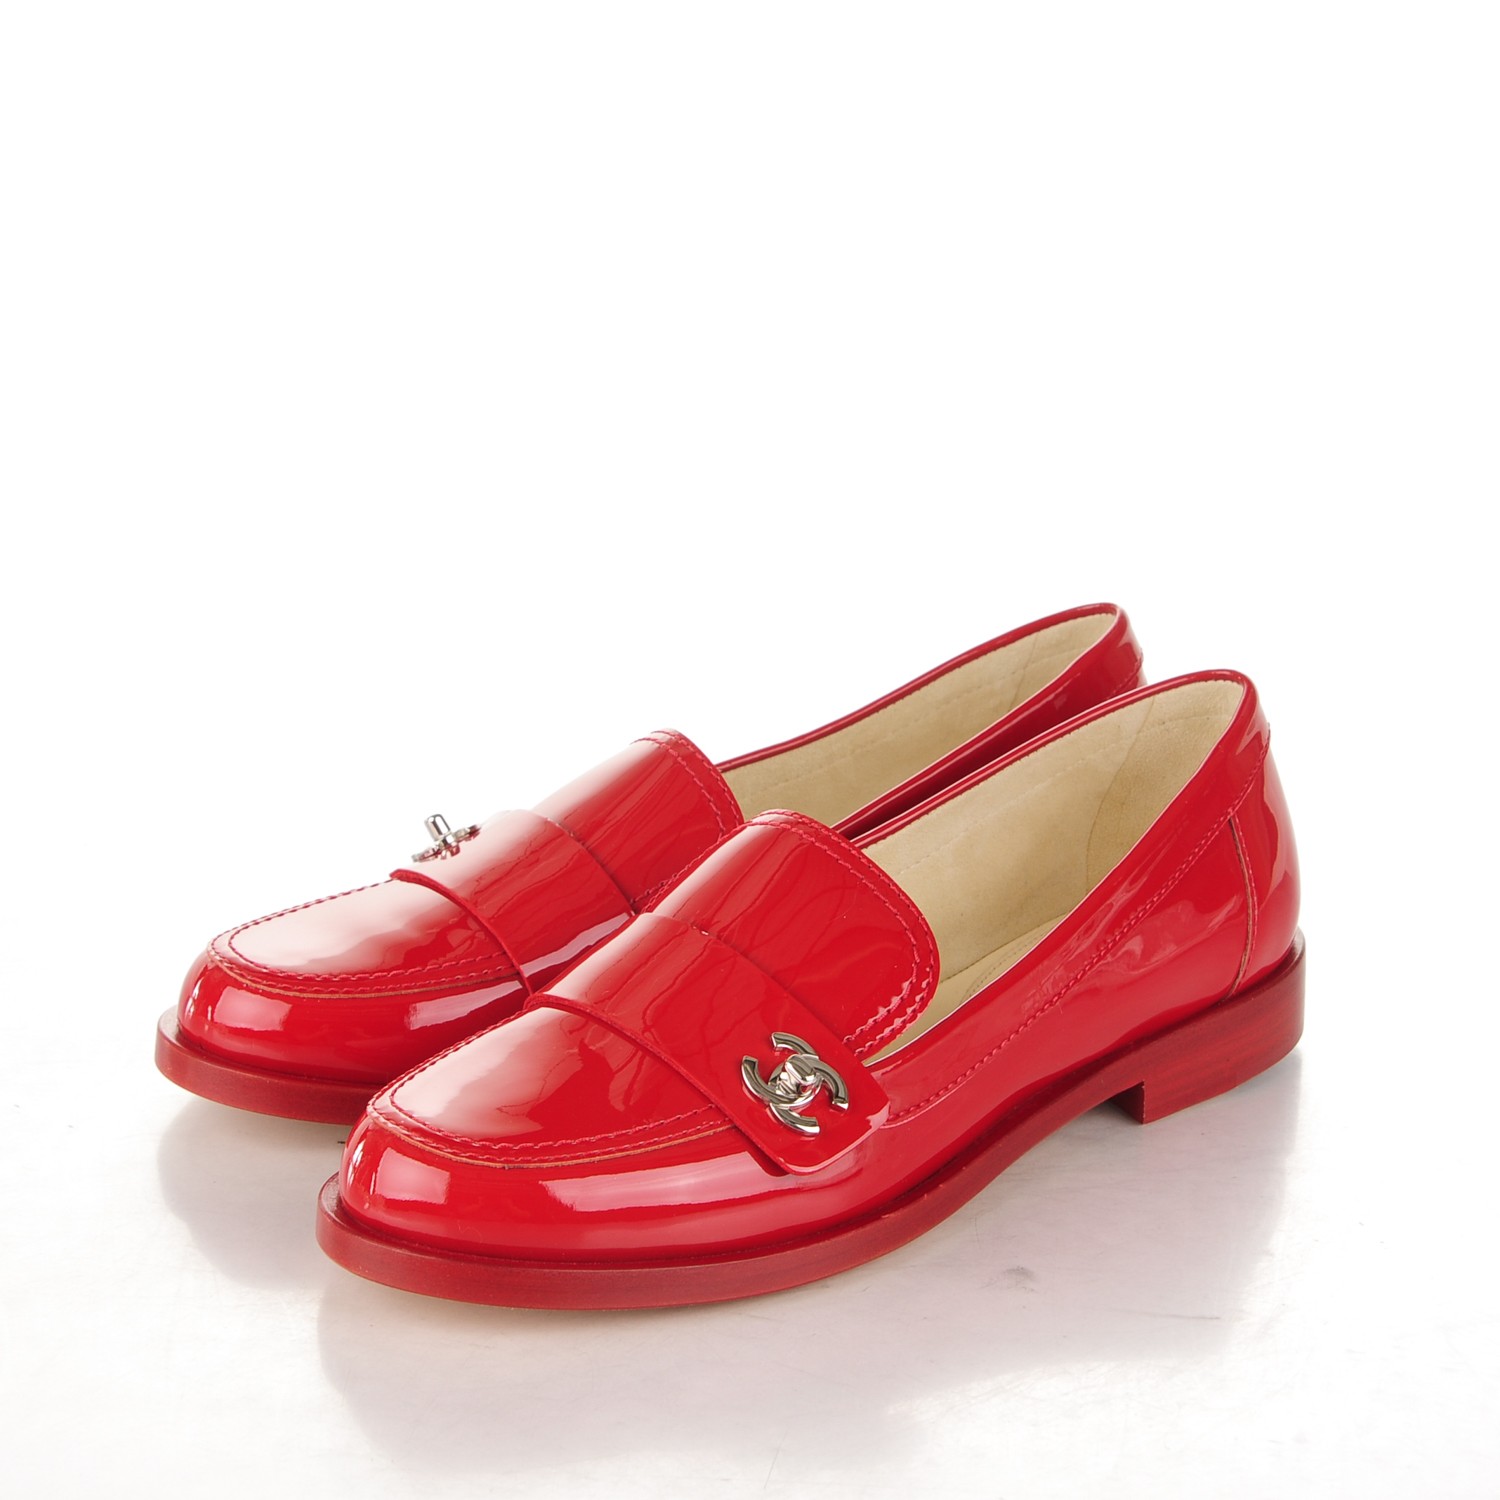 CHANEL Patent CC Loafers 36.5 Red 169731